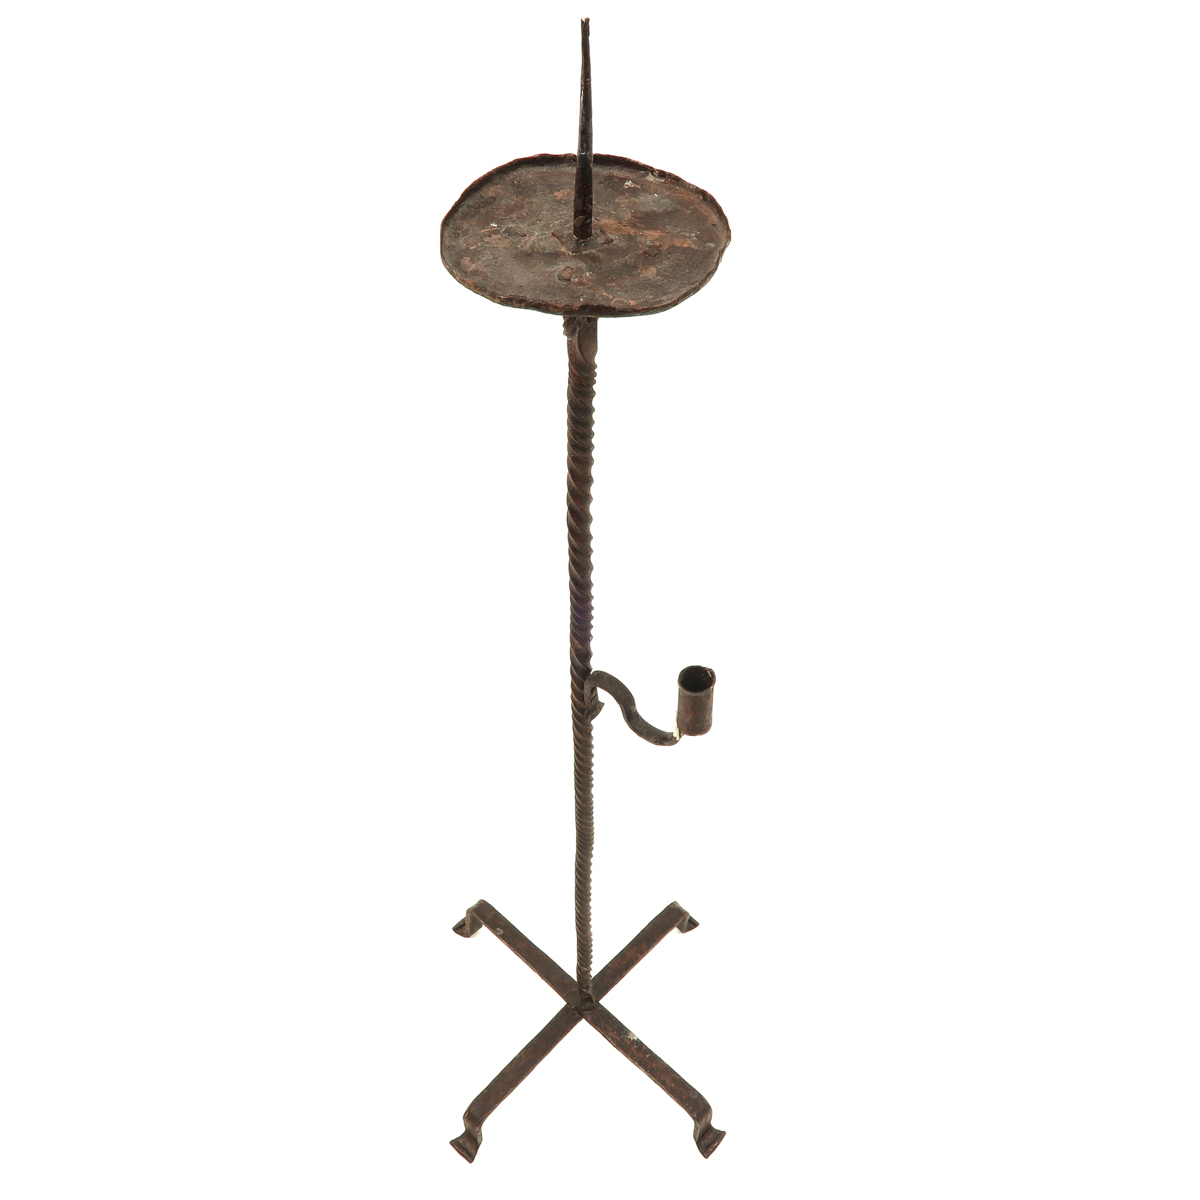 A 17th Century Candlestick - Image 5 of 8